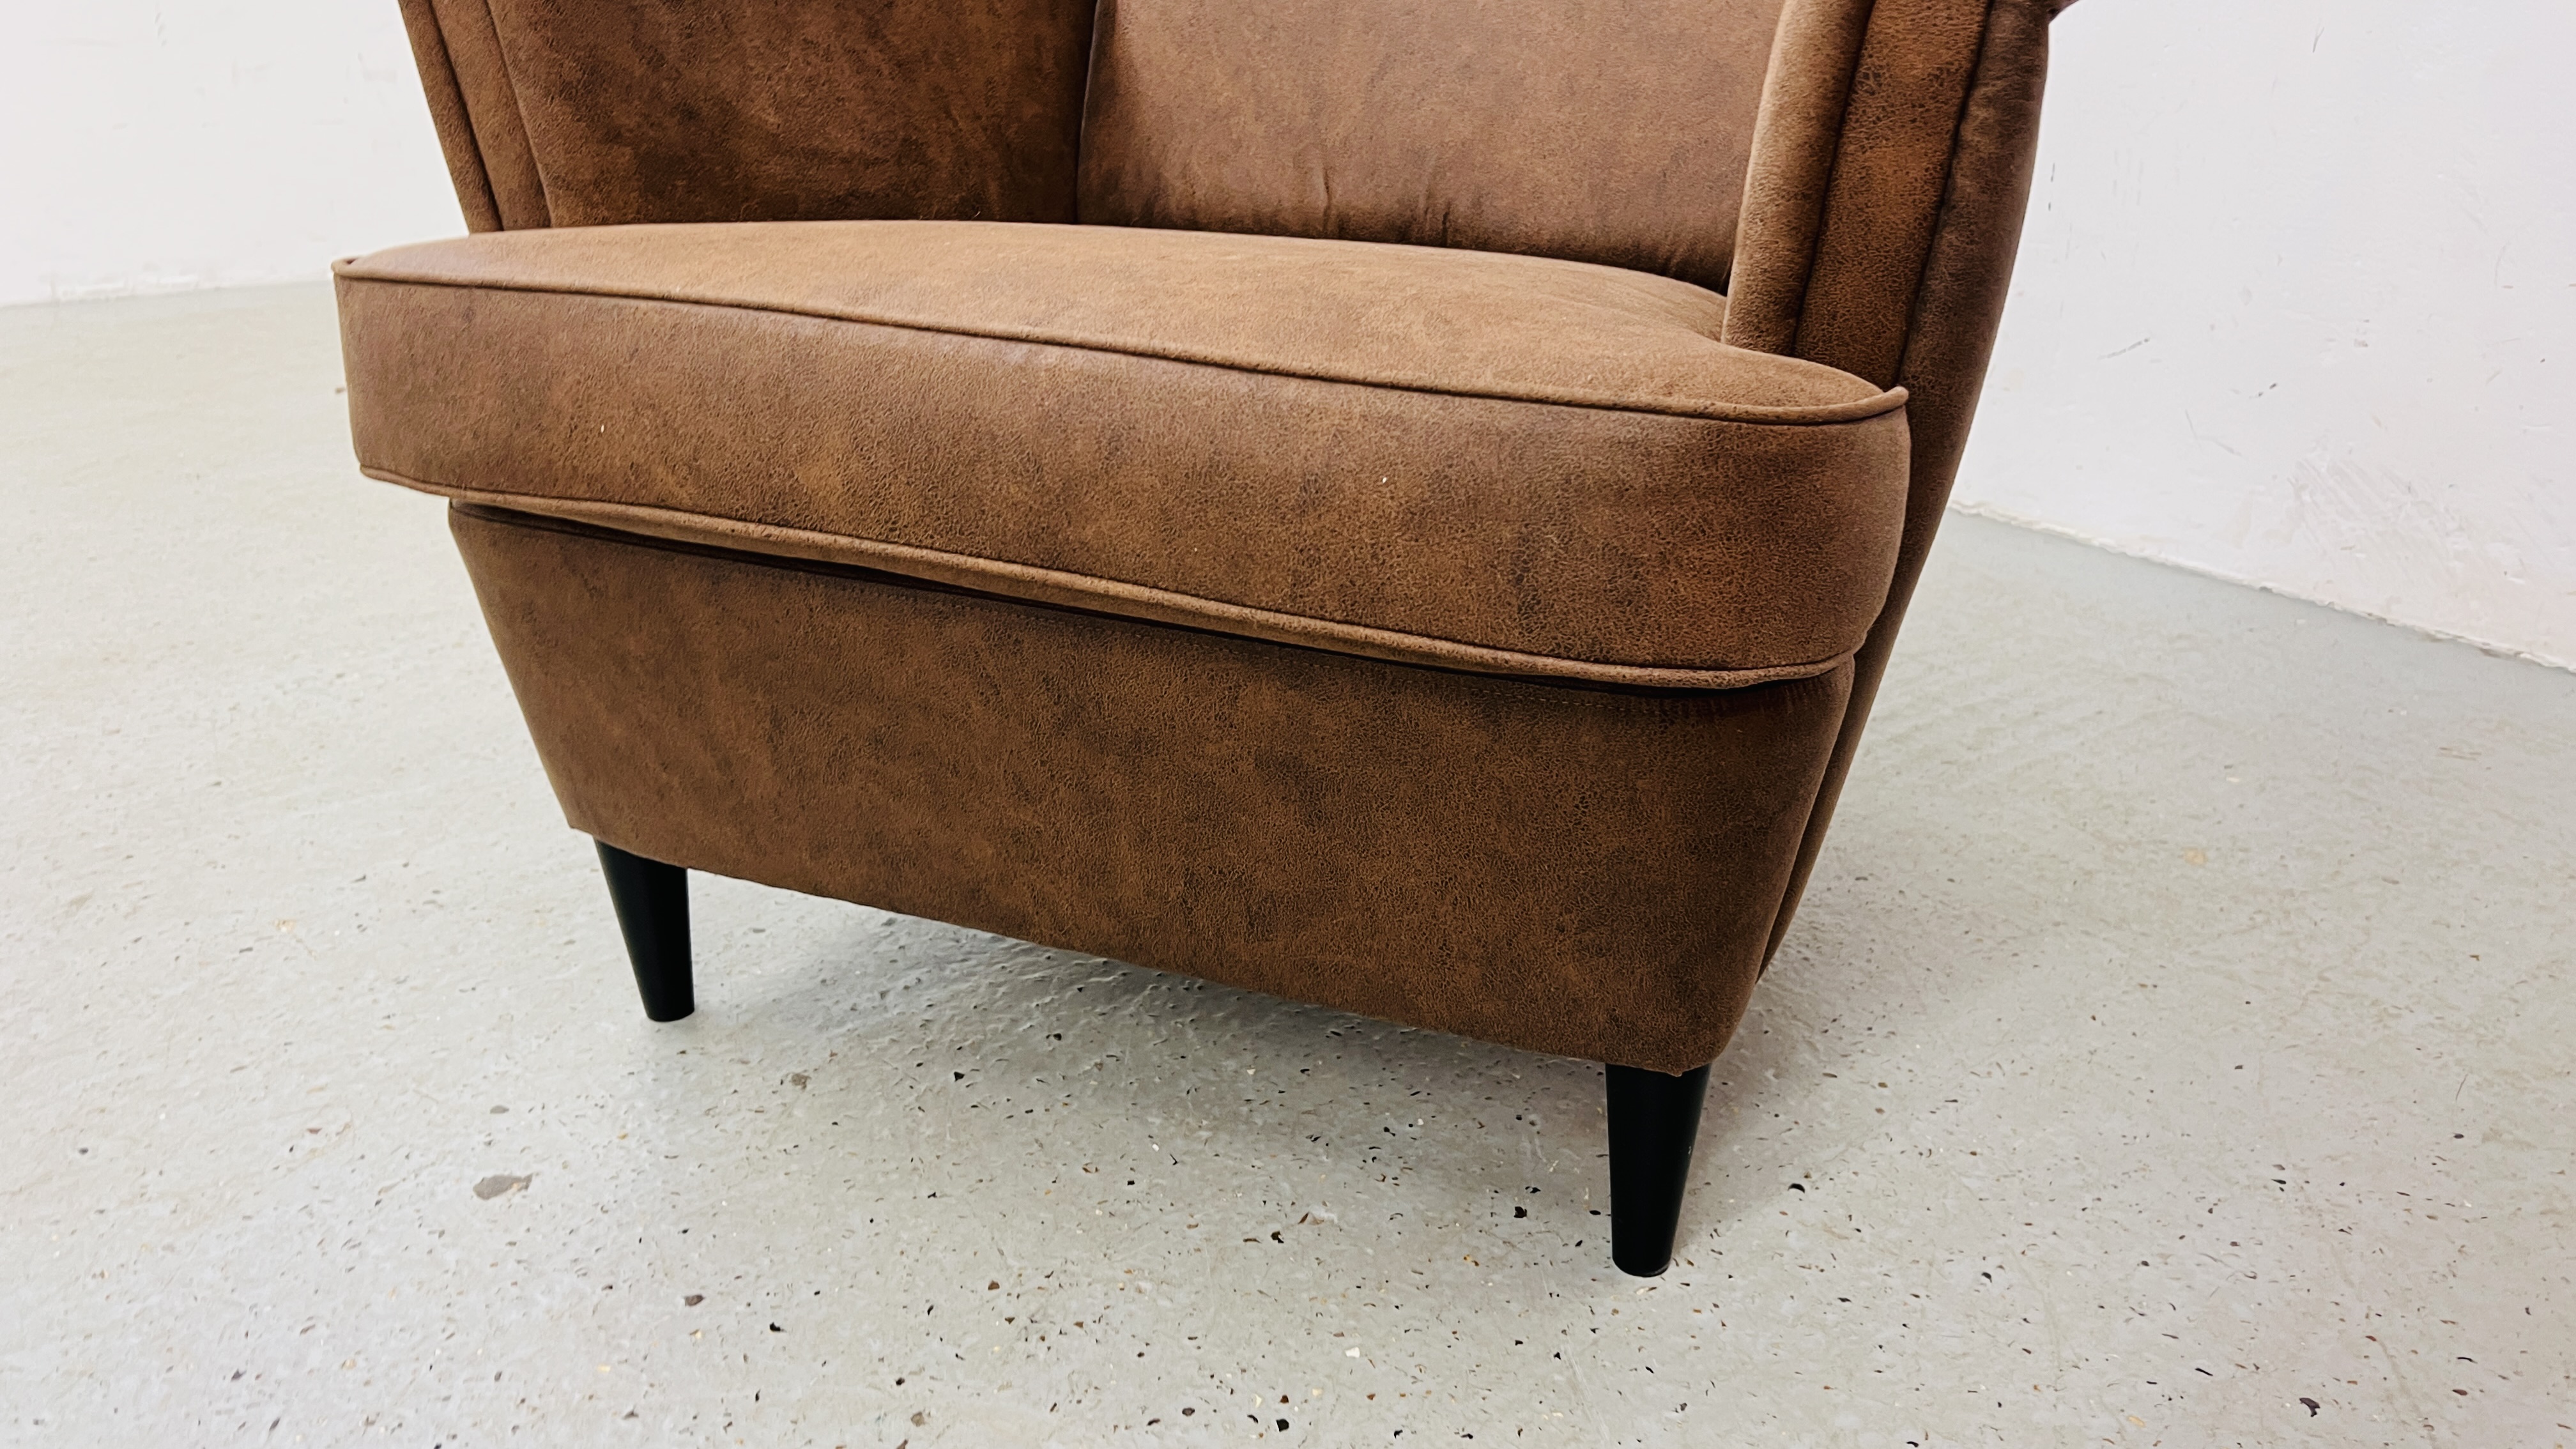 A MODEERN IKEA DESIGNER WINGED ARM CHAIR FAUX BROWN SUEDE UPHOLSTERTY - Image 4 of 7